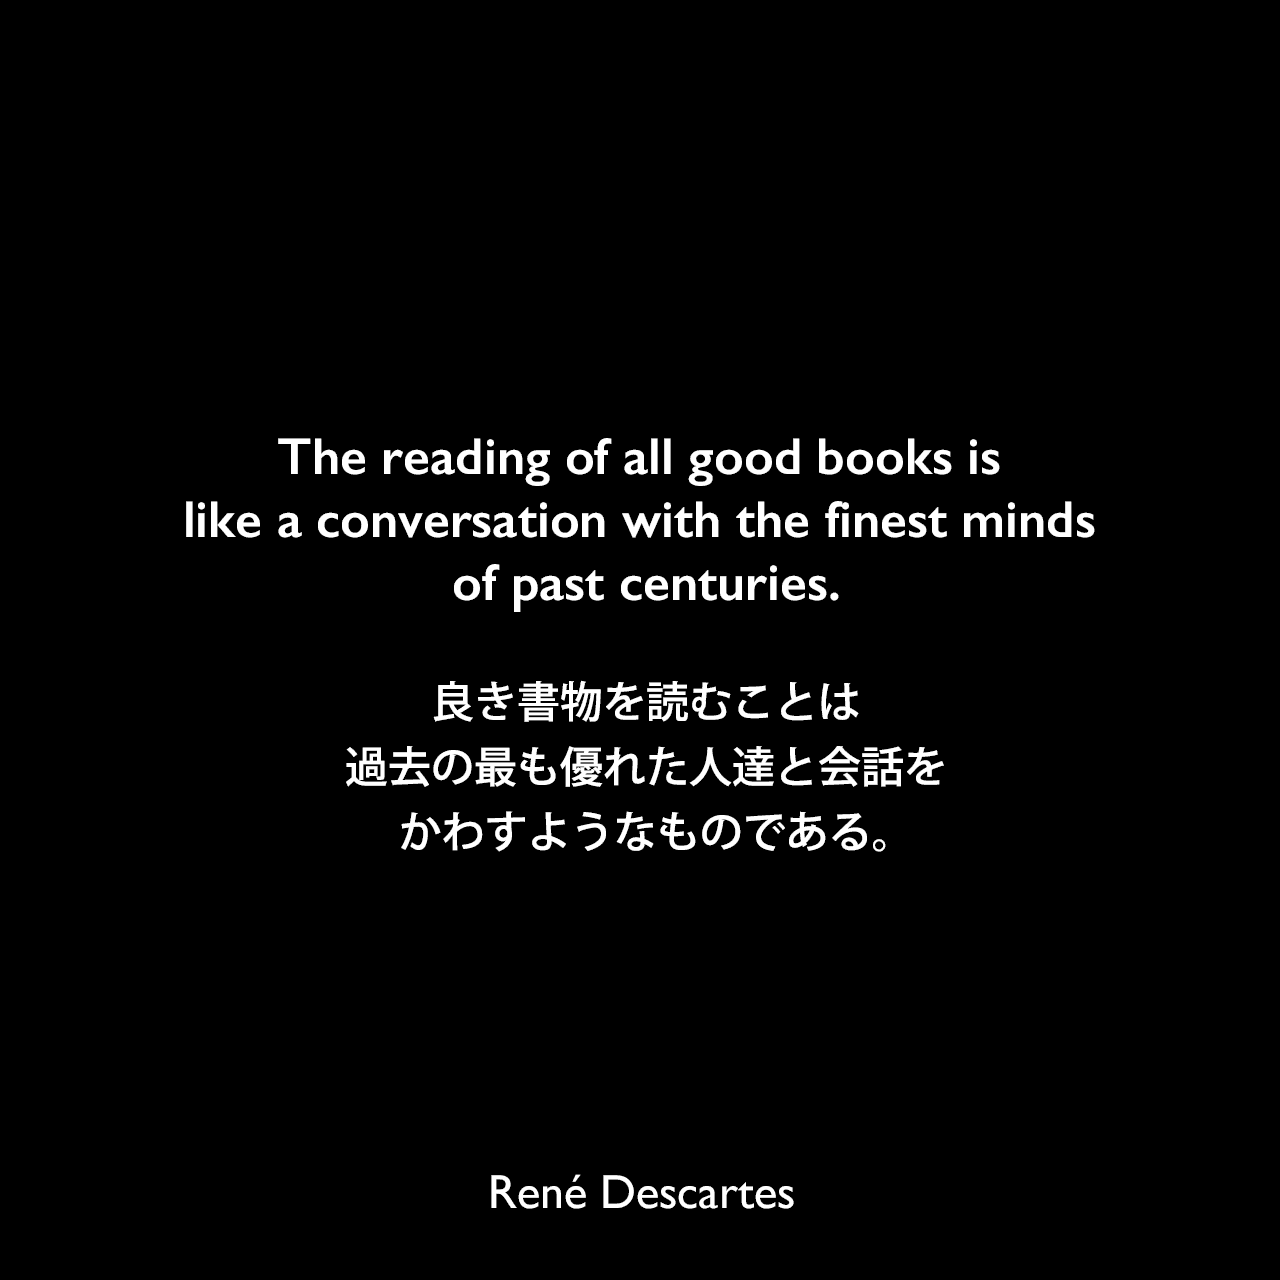 The reading of all good books is like a conversation with the finest minds of past centuries.良き書物を読むことは、過去の最も優れた人達と会話をかわすようなものである。René Descartes